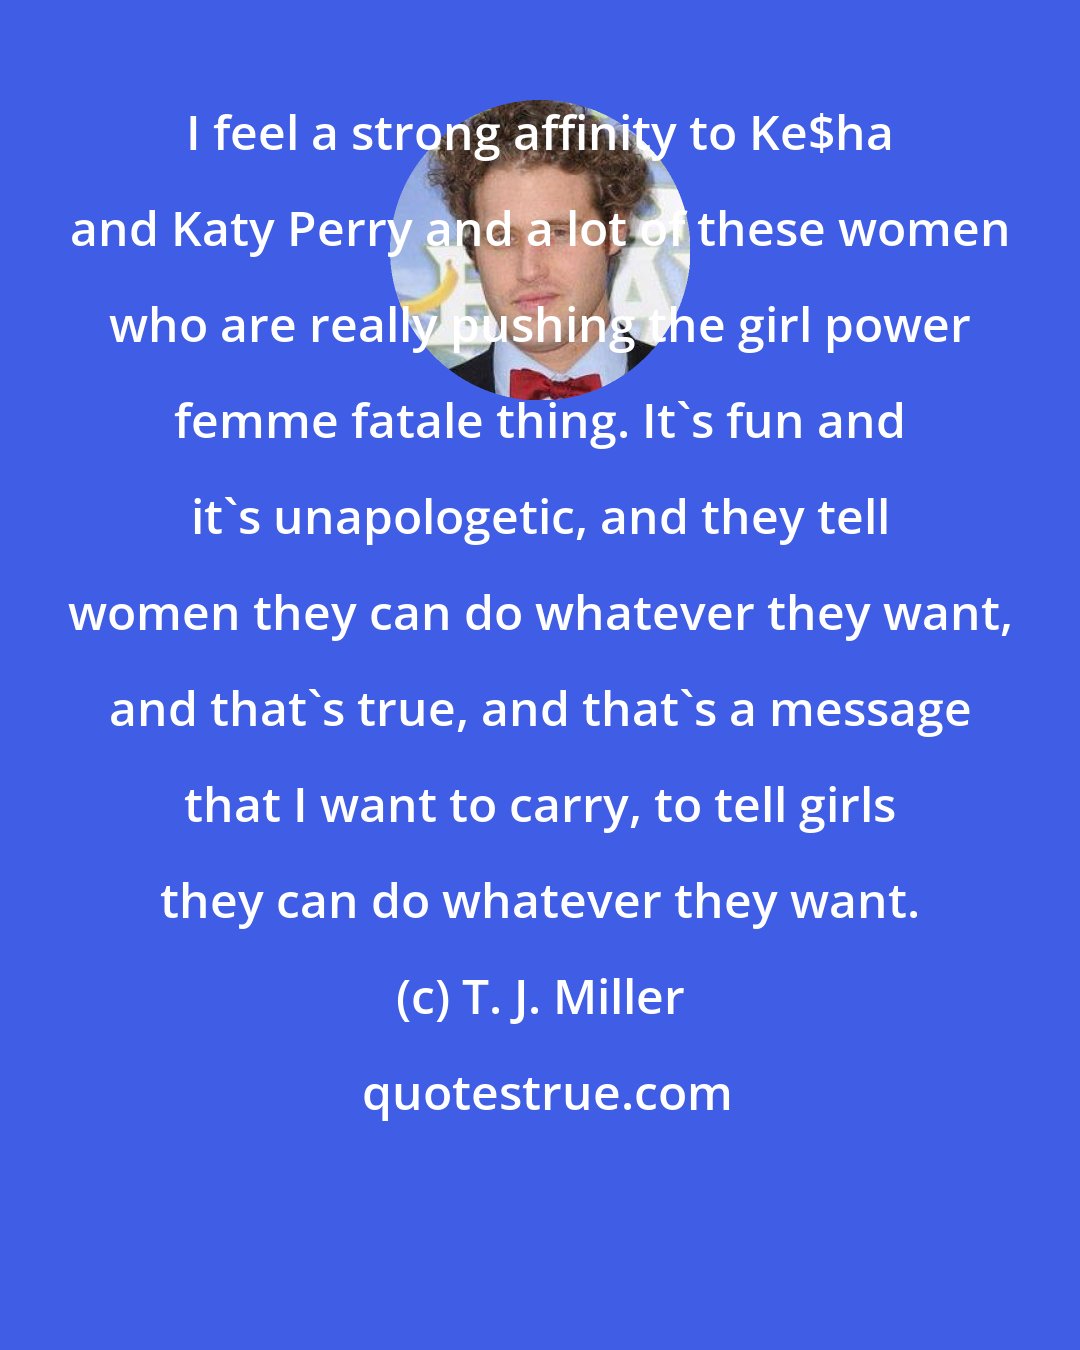 T. J. Miller: I feel a strong affinity to Ke$ha and Katy Perry and a lot of these women who are really pushing the girl power femme fatale thing. It's fun and it's unapologetic, and they tell women they can do whatever they want, and that's true, and that's a message that I want to carry, to tell girls they can do whatever they want.